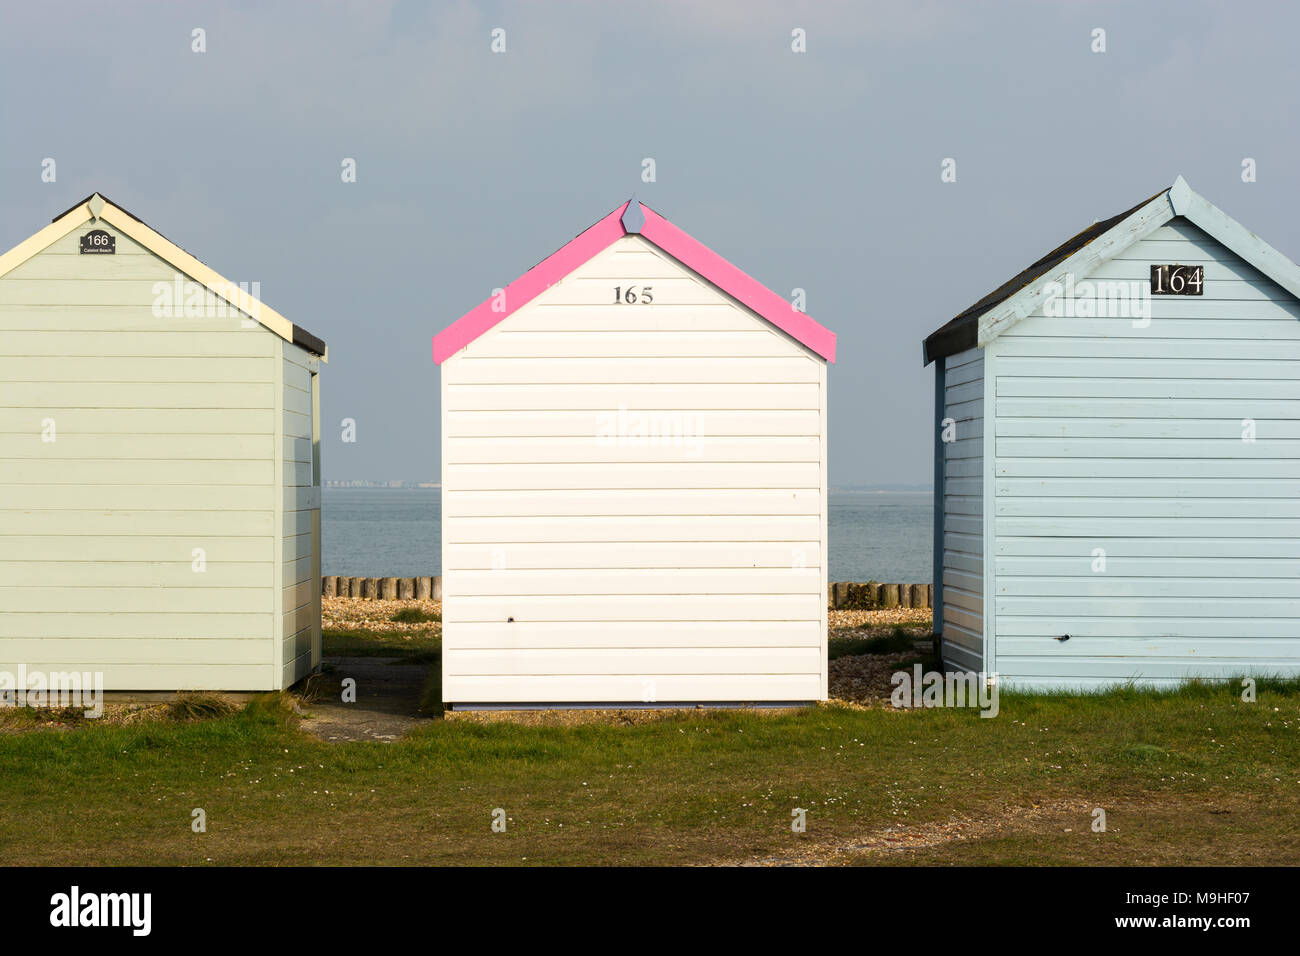 Three colourful beach huts in a row at Calshot Spit, Southampton, Hampshire, UK with a feminine looking on the the middle making a statement. Stock Photo